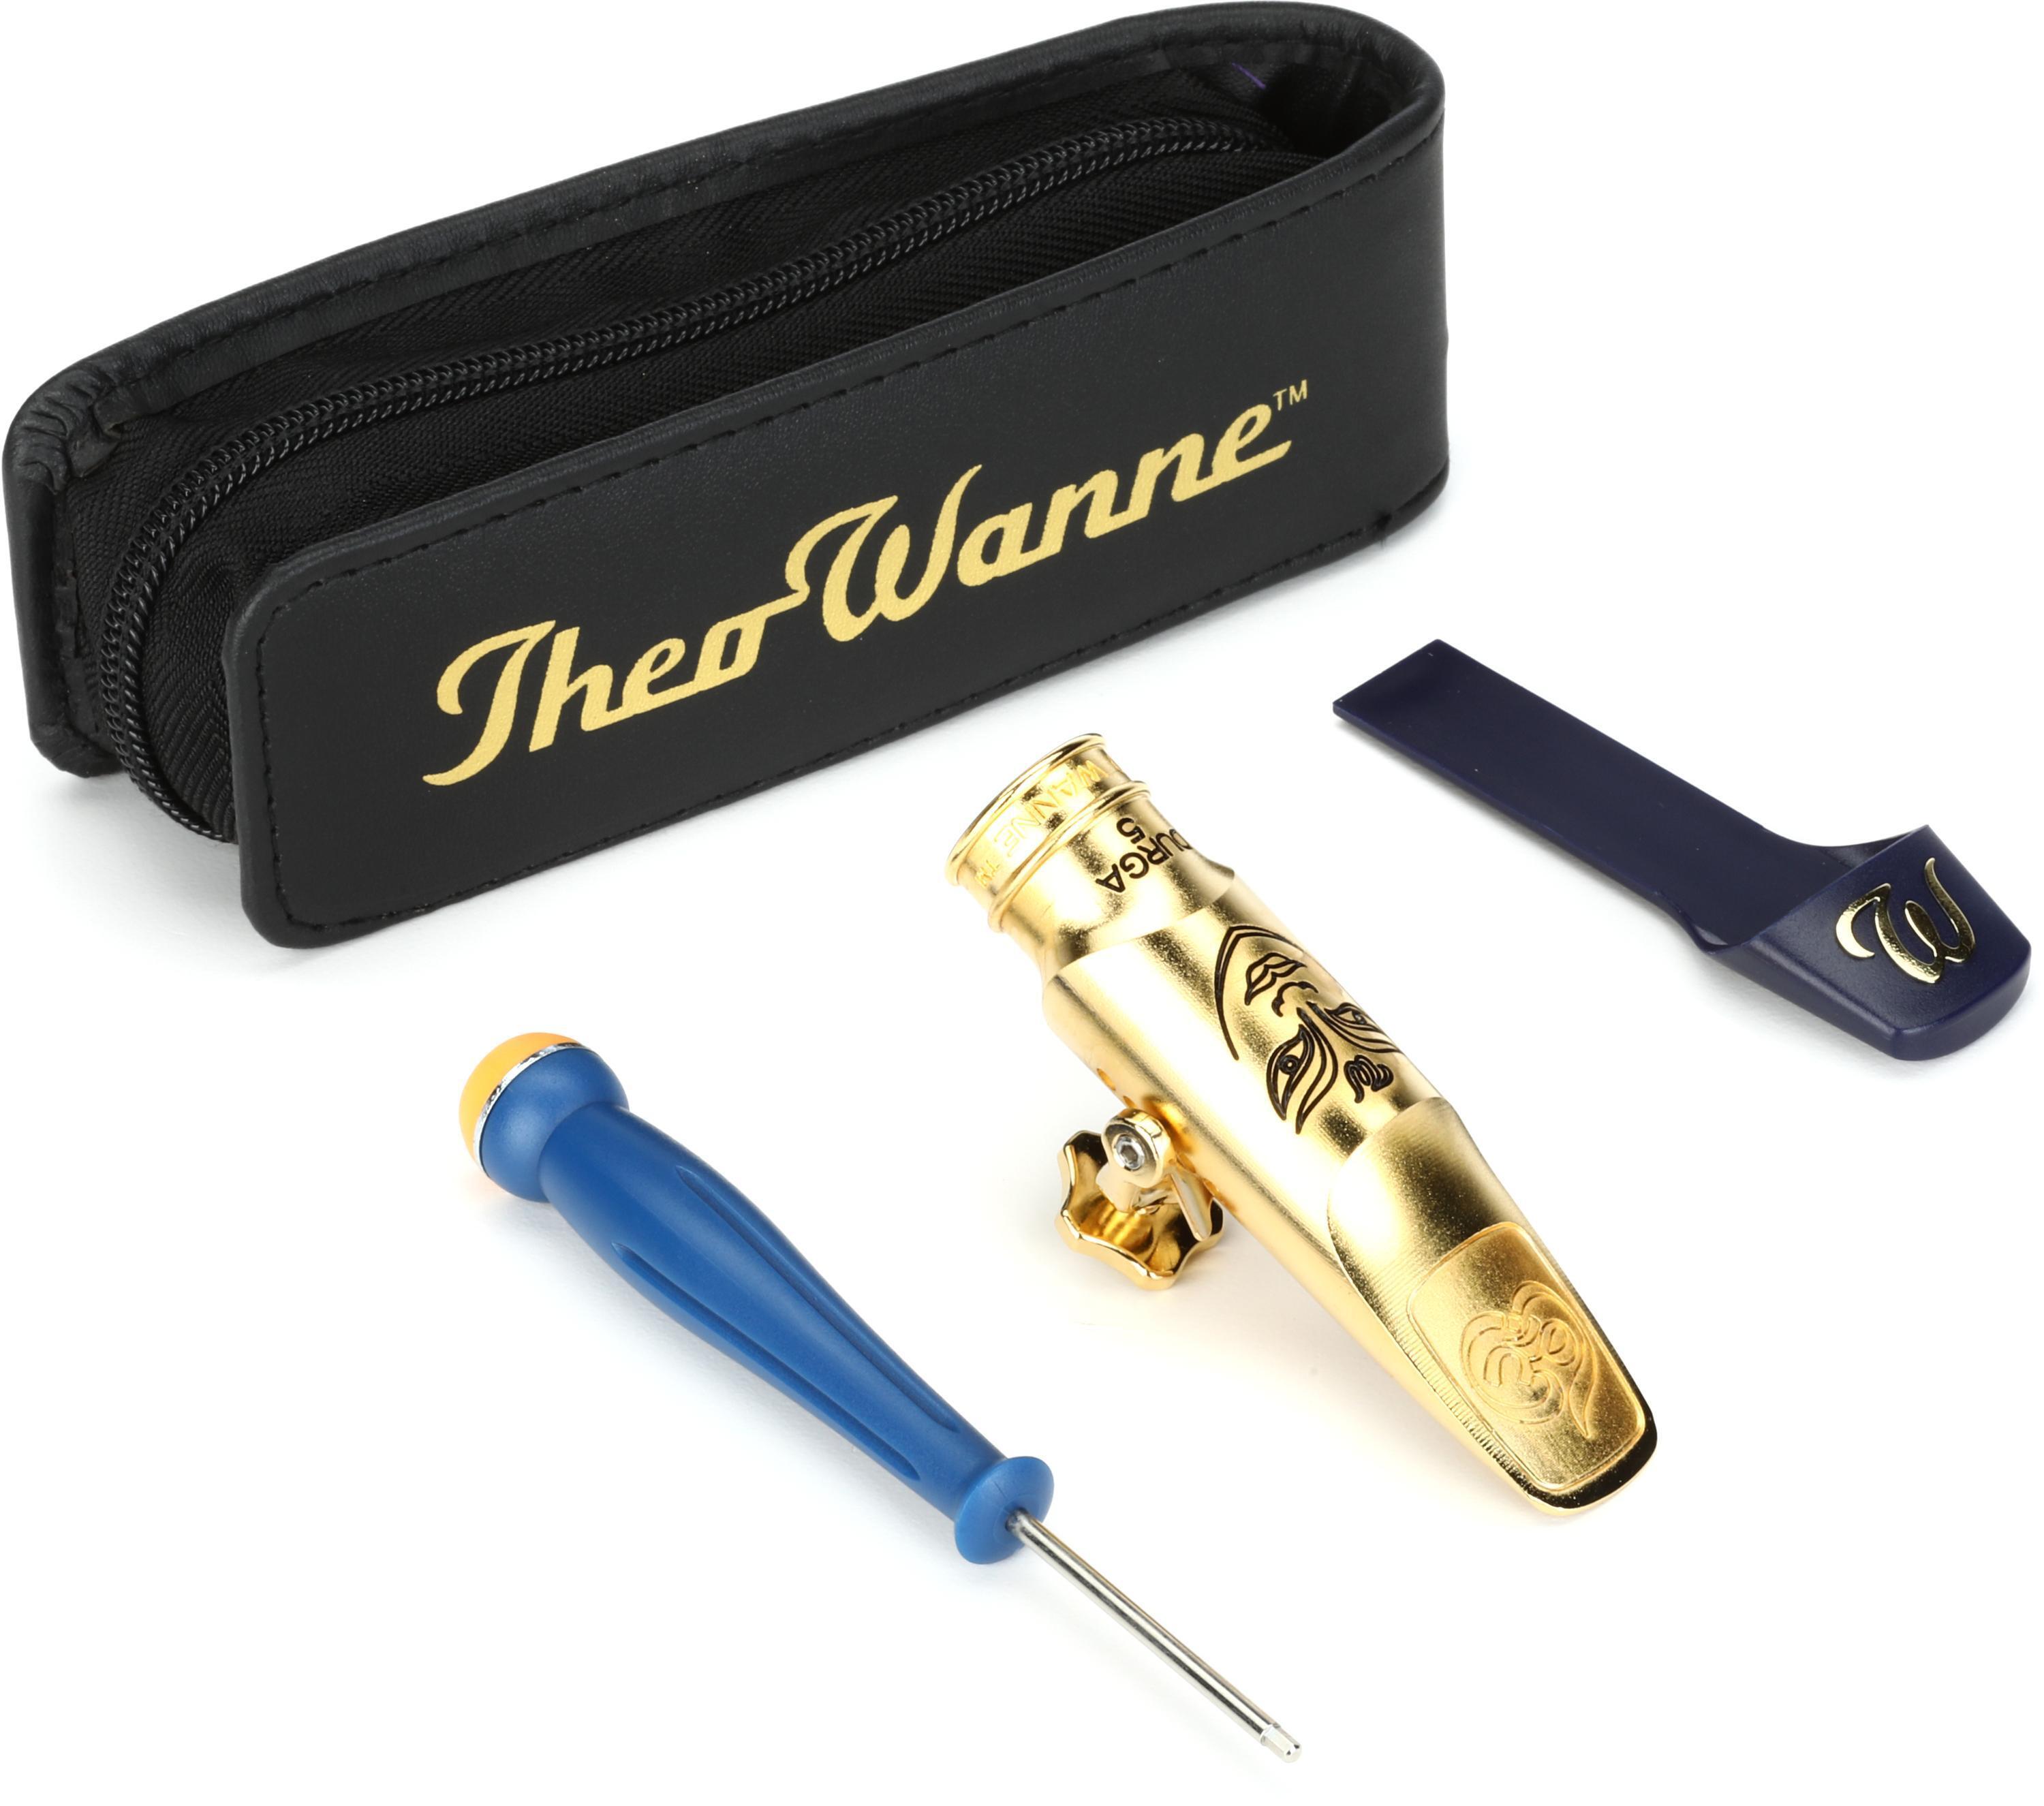 Theo Wanne DU5-AG8 Durga 5 Alto Saxophone Mouthpiece - 8 Gold-plated